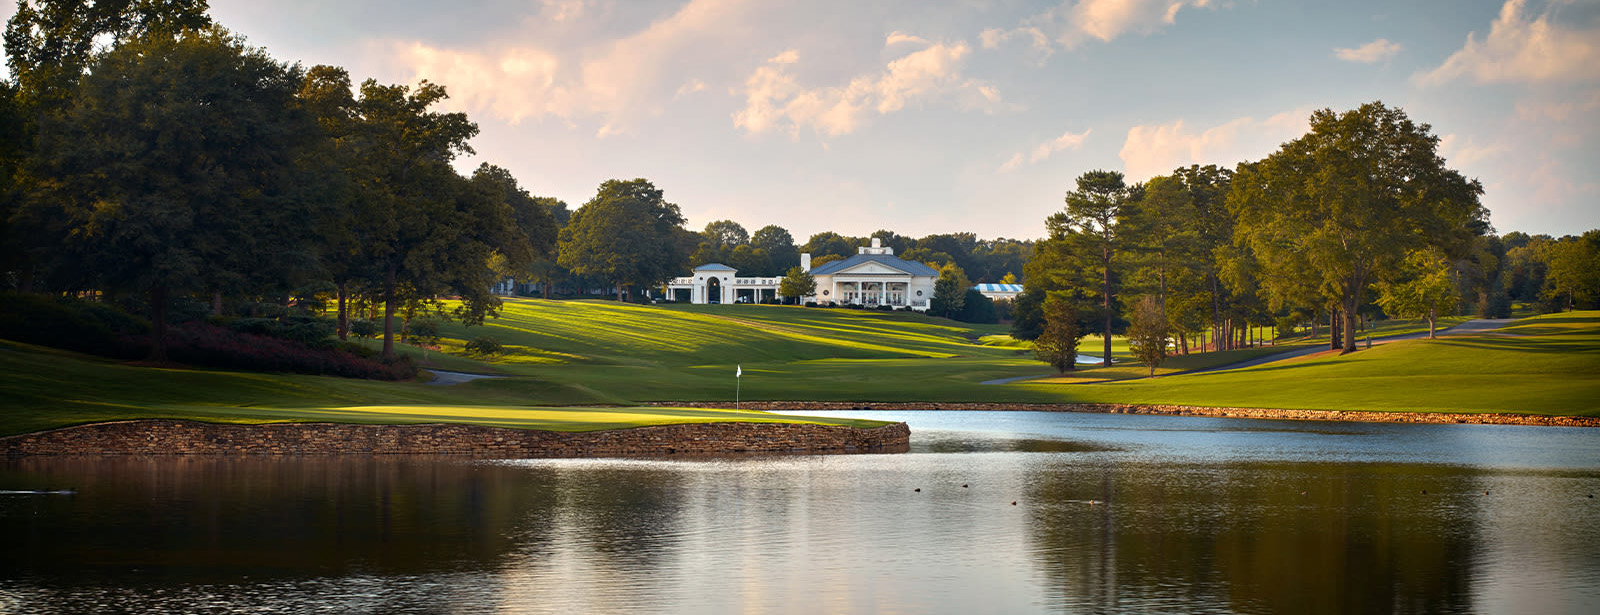 View from 17th Hole - Photo by Gary Kellner/PGA of America